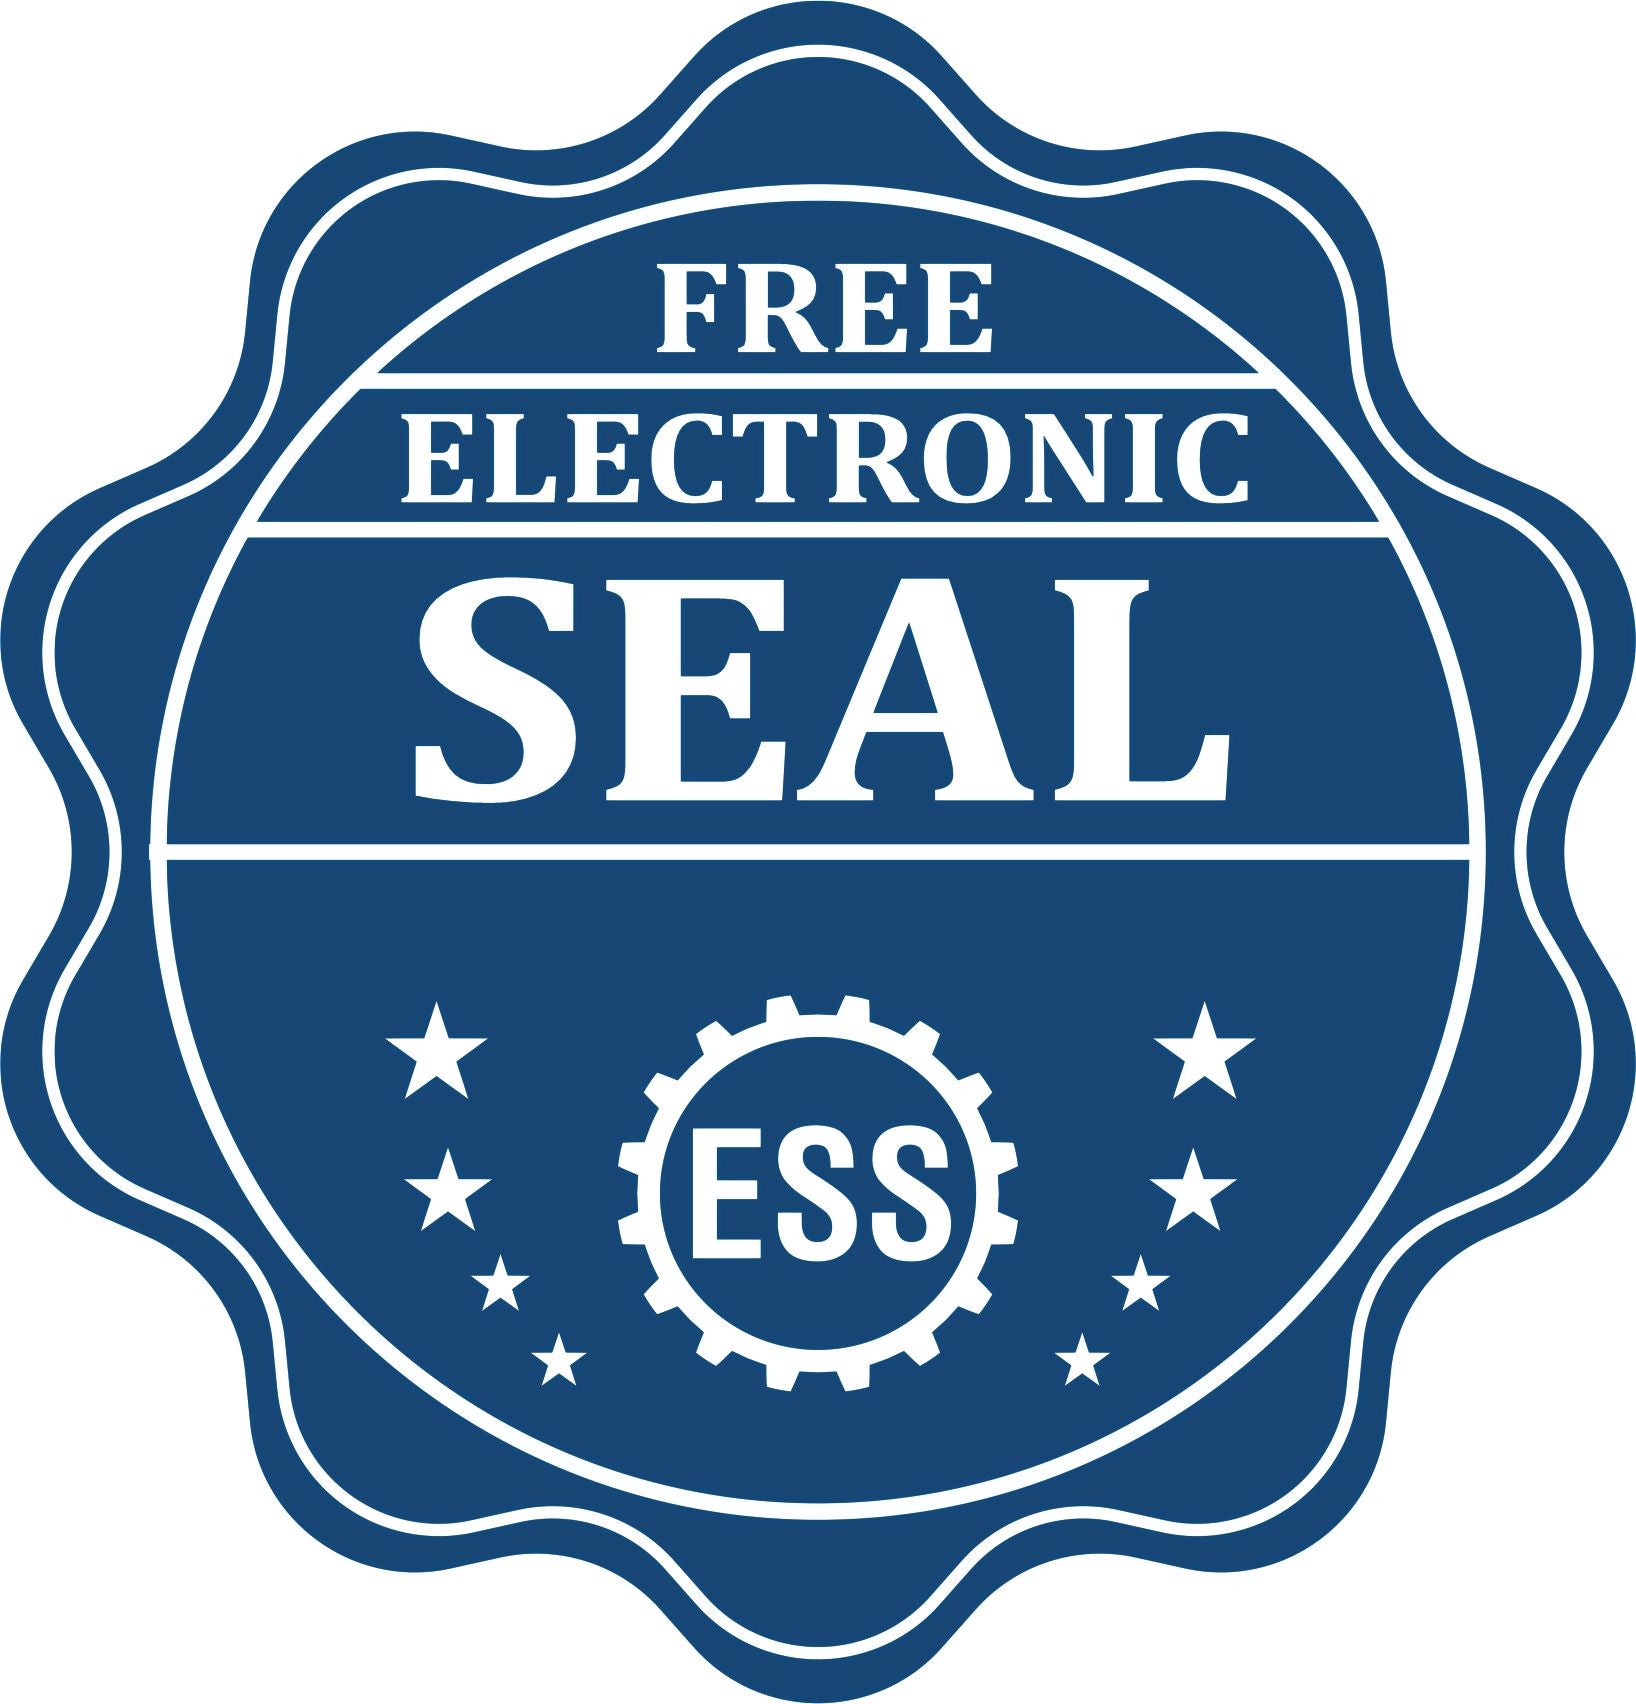 A badge showing a free electronic seal for the Maryland Engineer Desk Seal with stars and the ESS gear on the emblem.